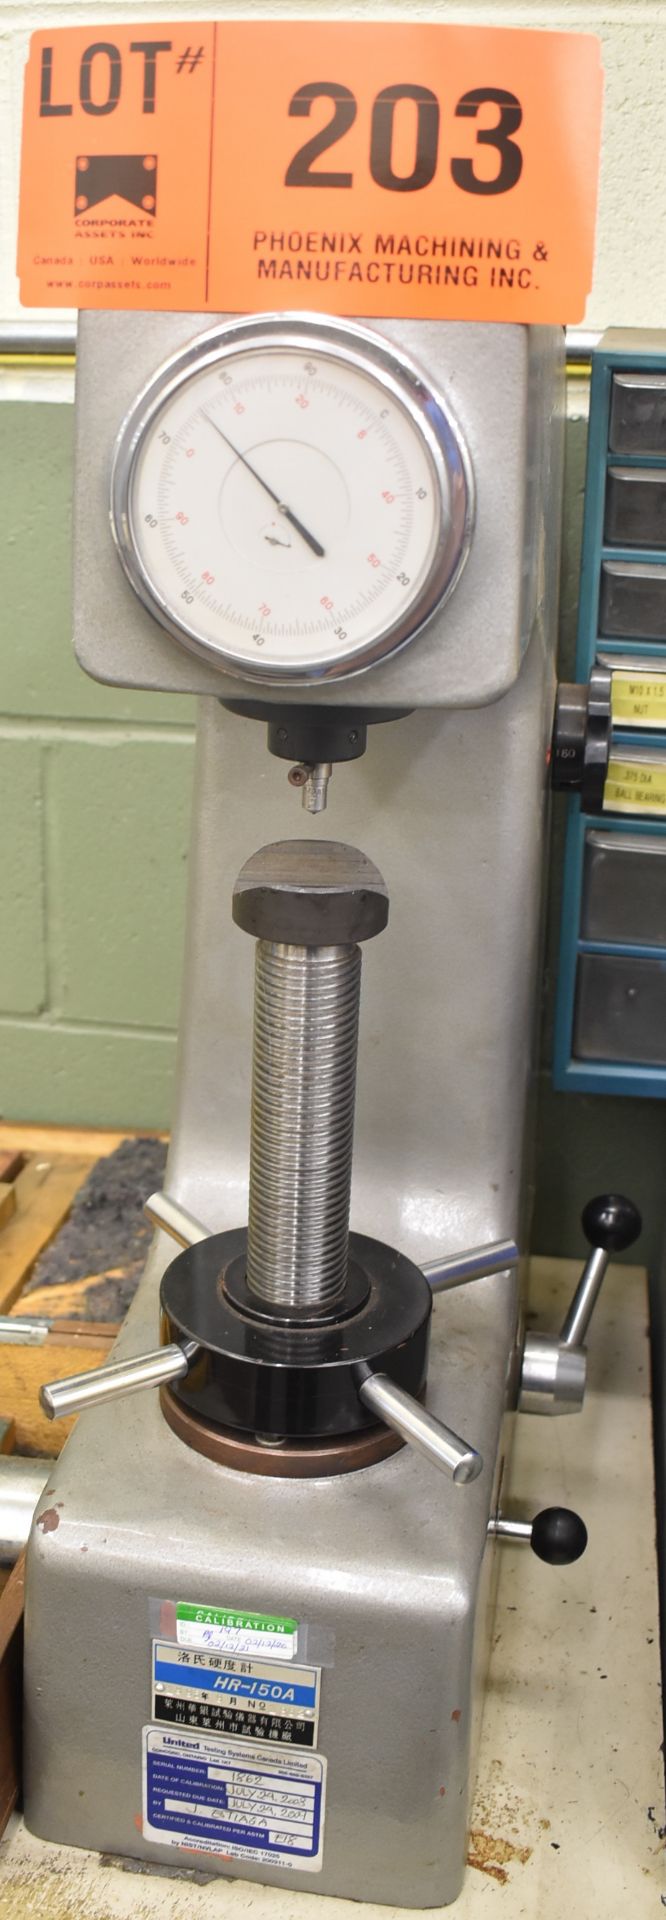 ROCKWELL HRA-150A DIAL-TYPE HARDNESS TESTER - Image 2 of 4